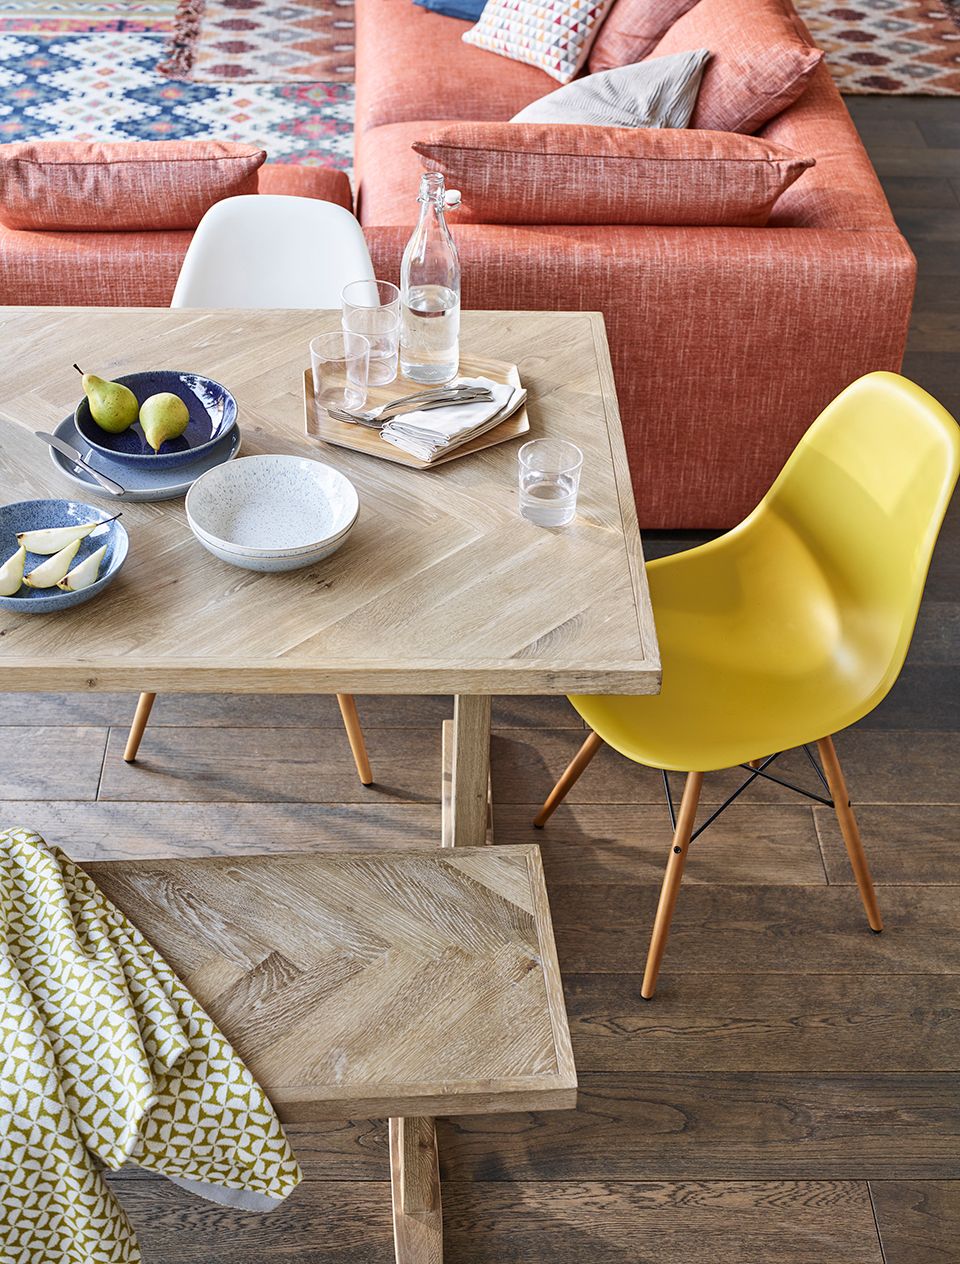 Dining table and yellow chair